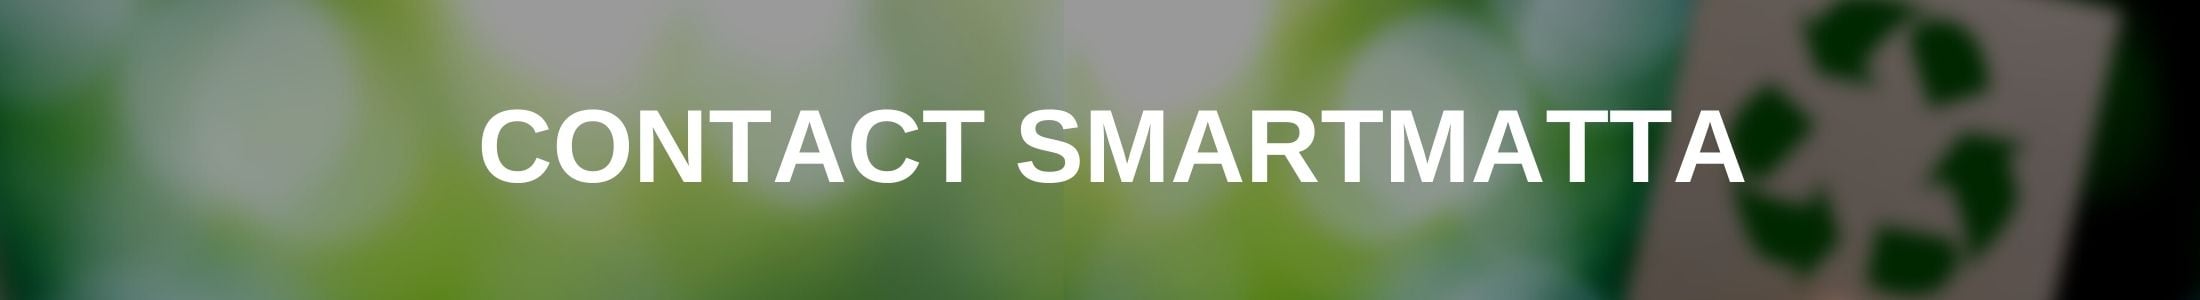 Contact SMARTMATTA for waste management solutions